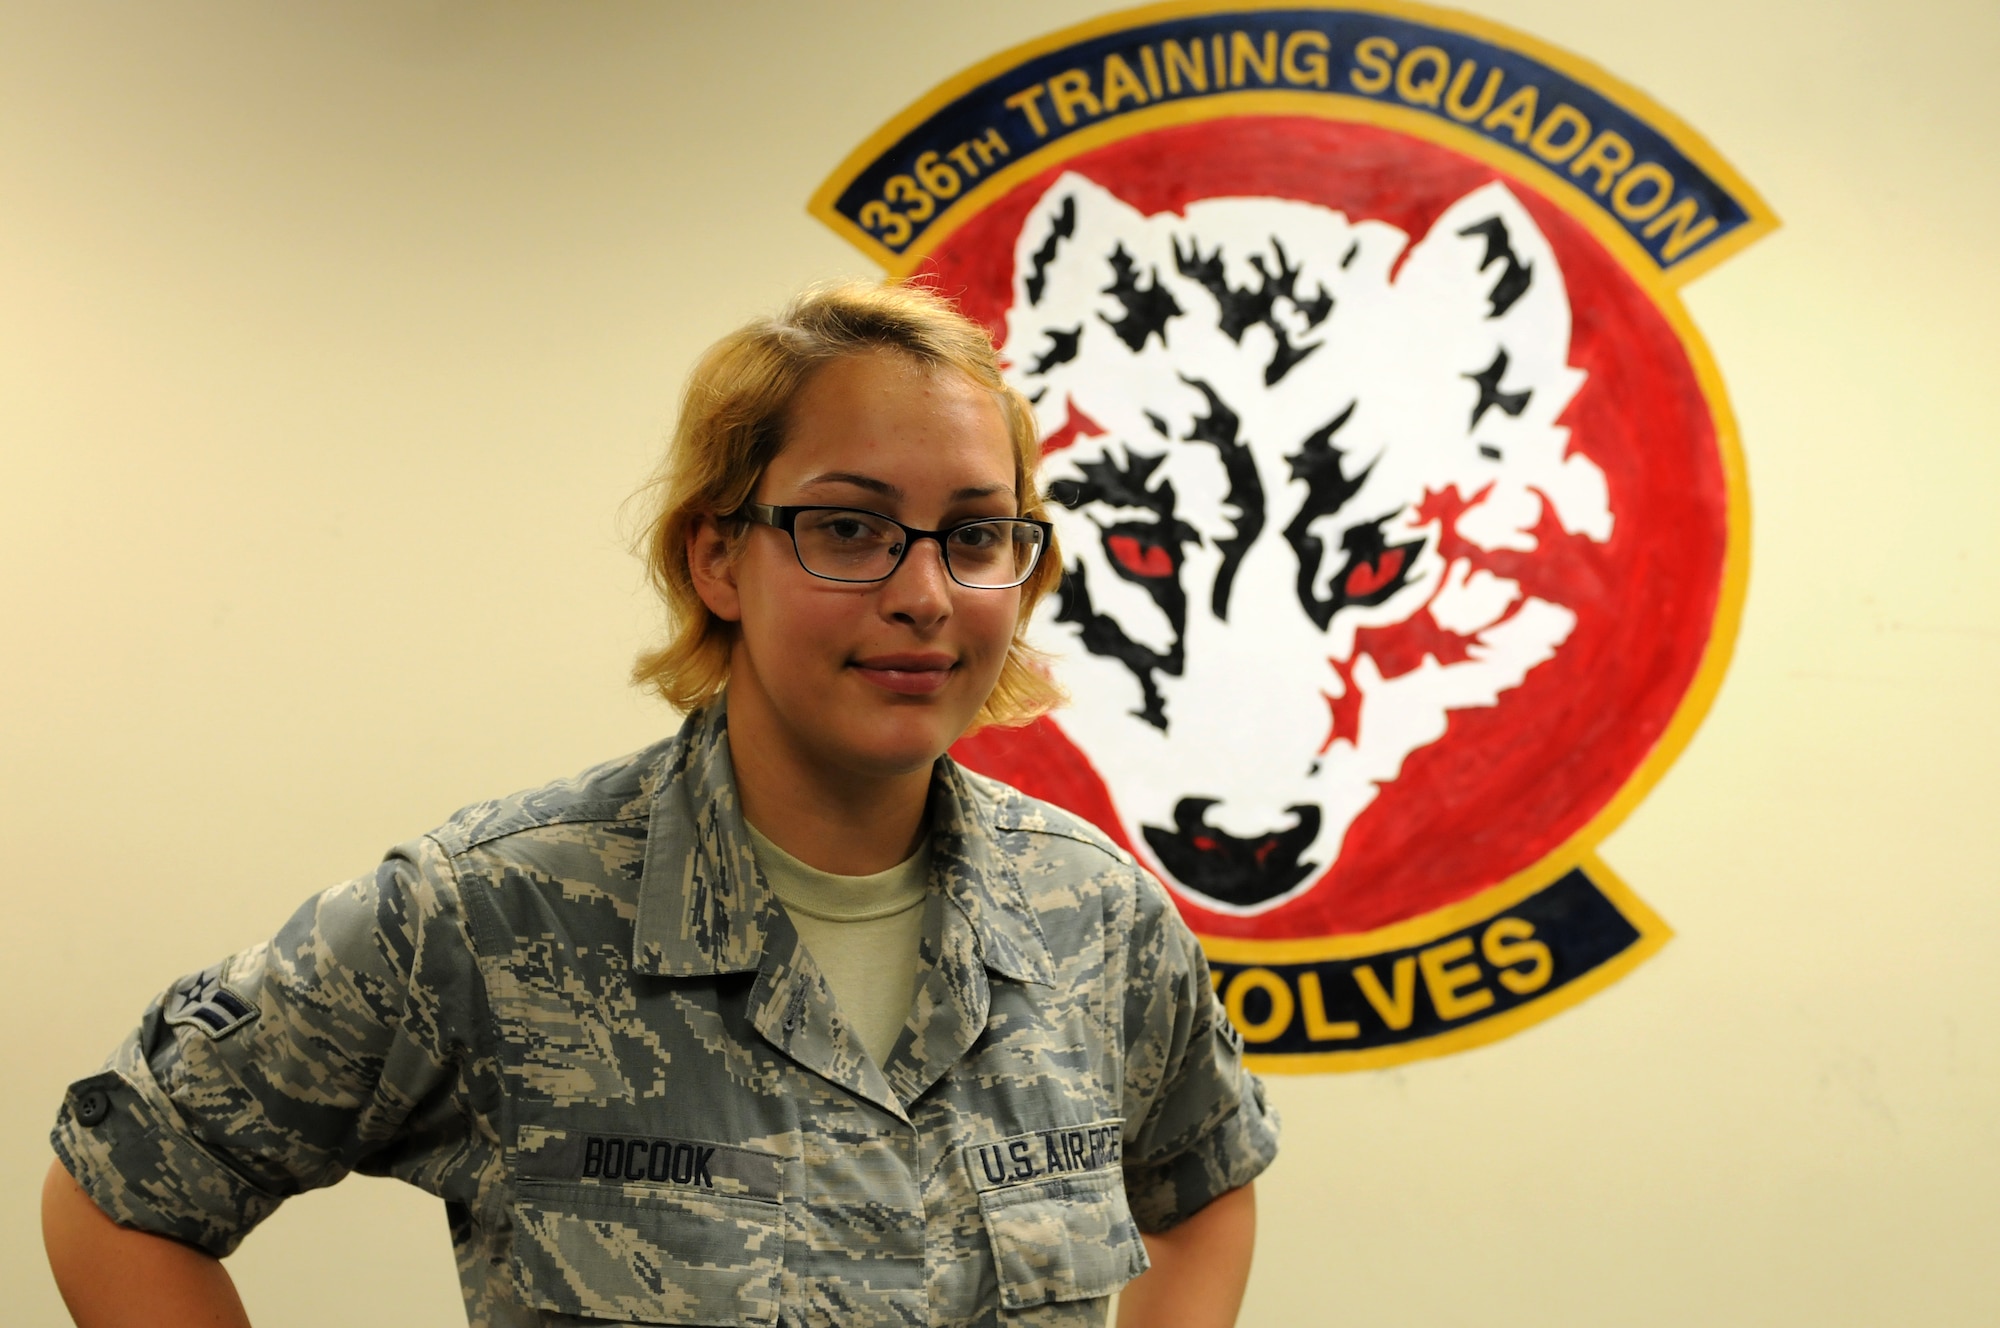 Airman 1st Class Amberlynn Bocook graduated from the cyber surety course in the 336th Training Squadron with a perfect score, April 30, 2015, Keesler Air Force Base, Miss. Bocook is a member of the Washington Air National Guard, and is continuing her training in the security plus course. (U.S. Air Force photo by Airman 1st Class Duncan McElroy)